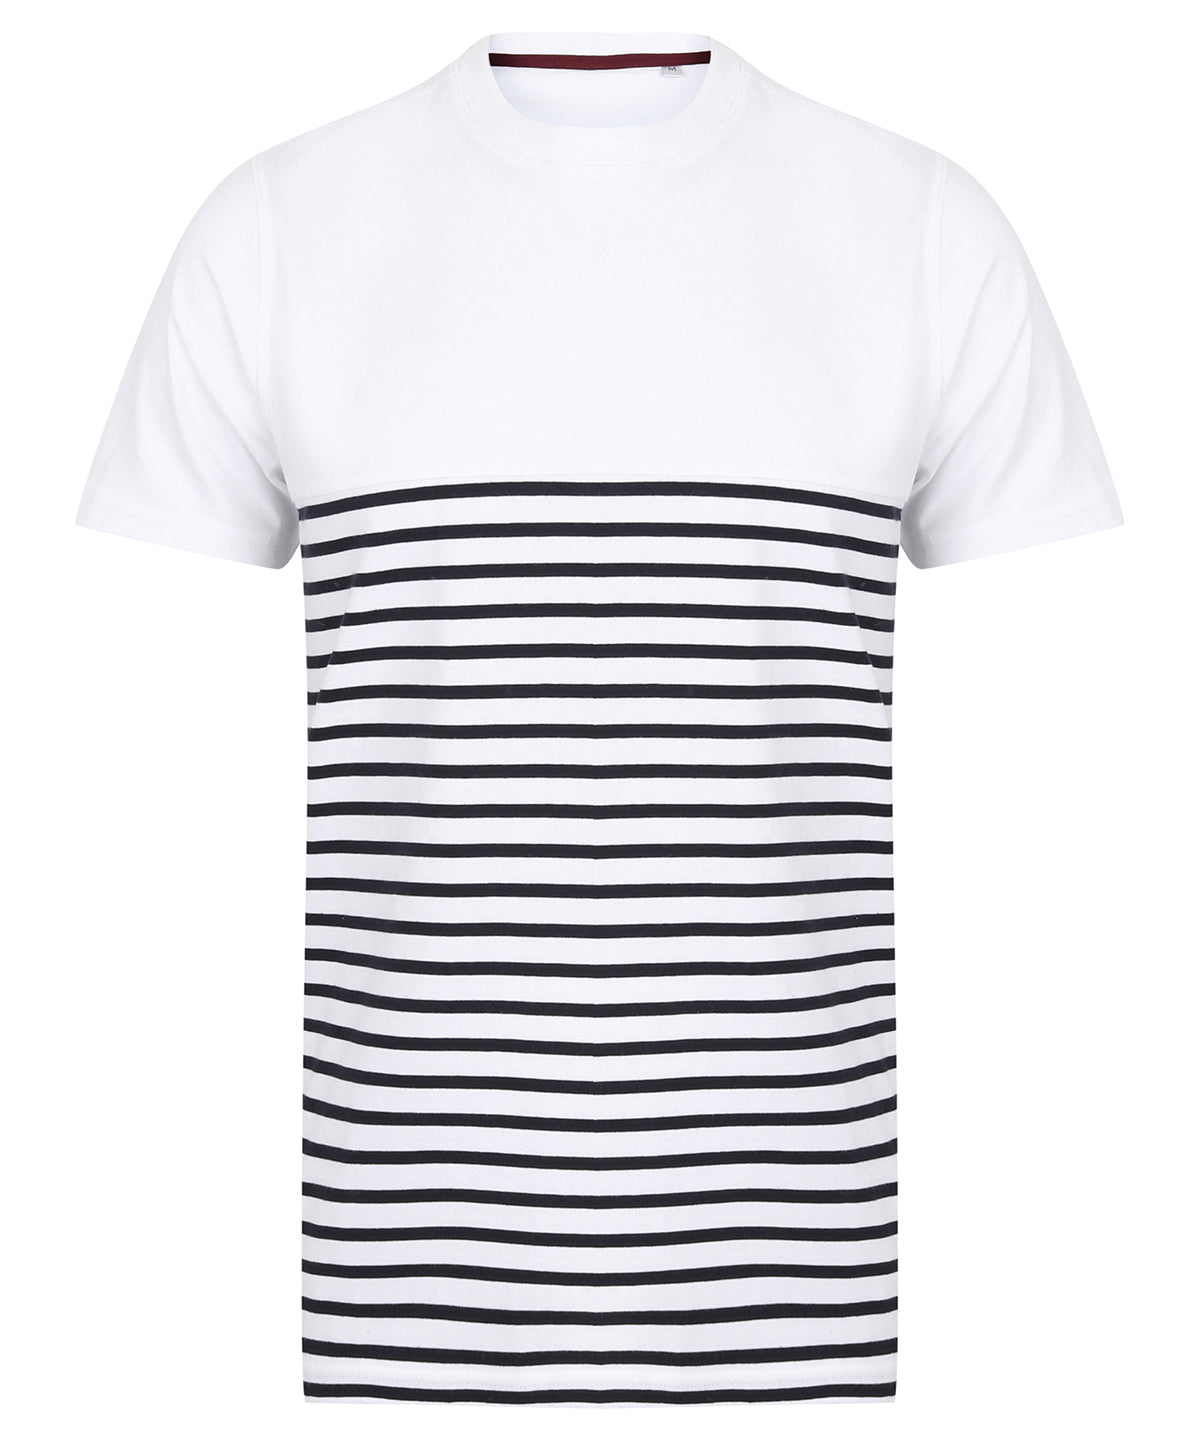 Personalised T-Shirts - Stripes Front Row Short-sleeved Breton T